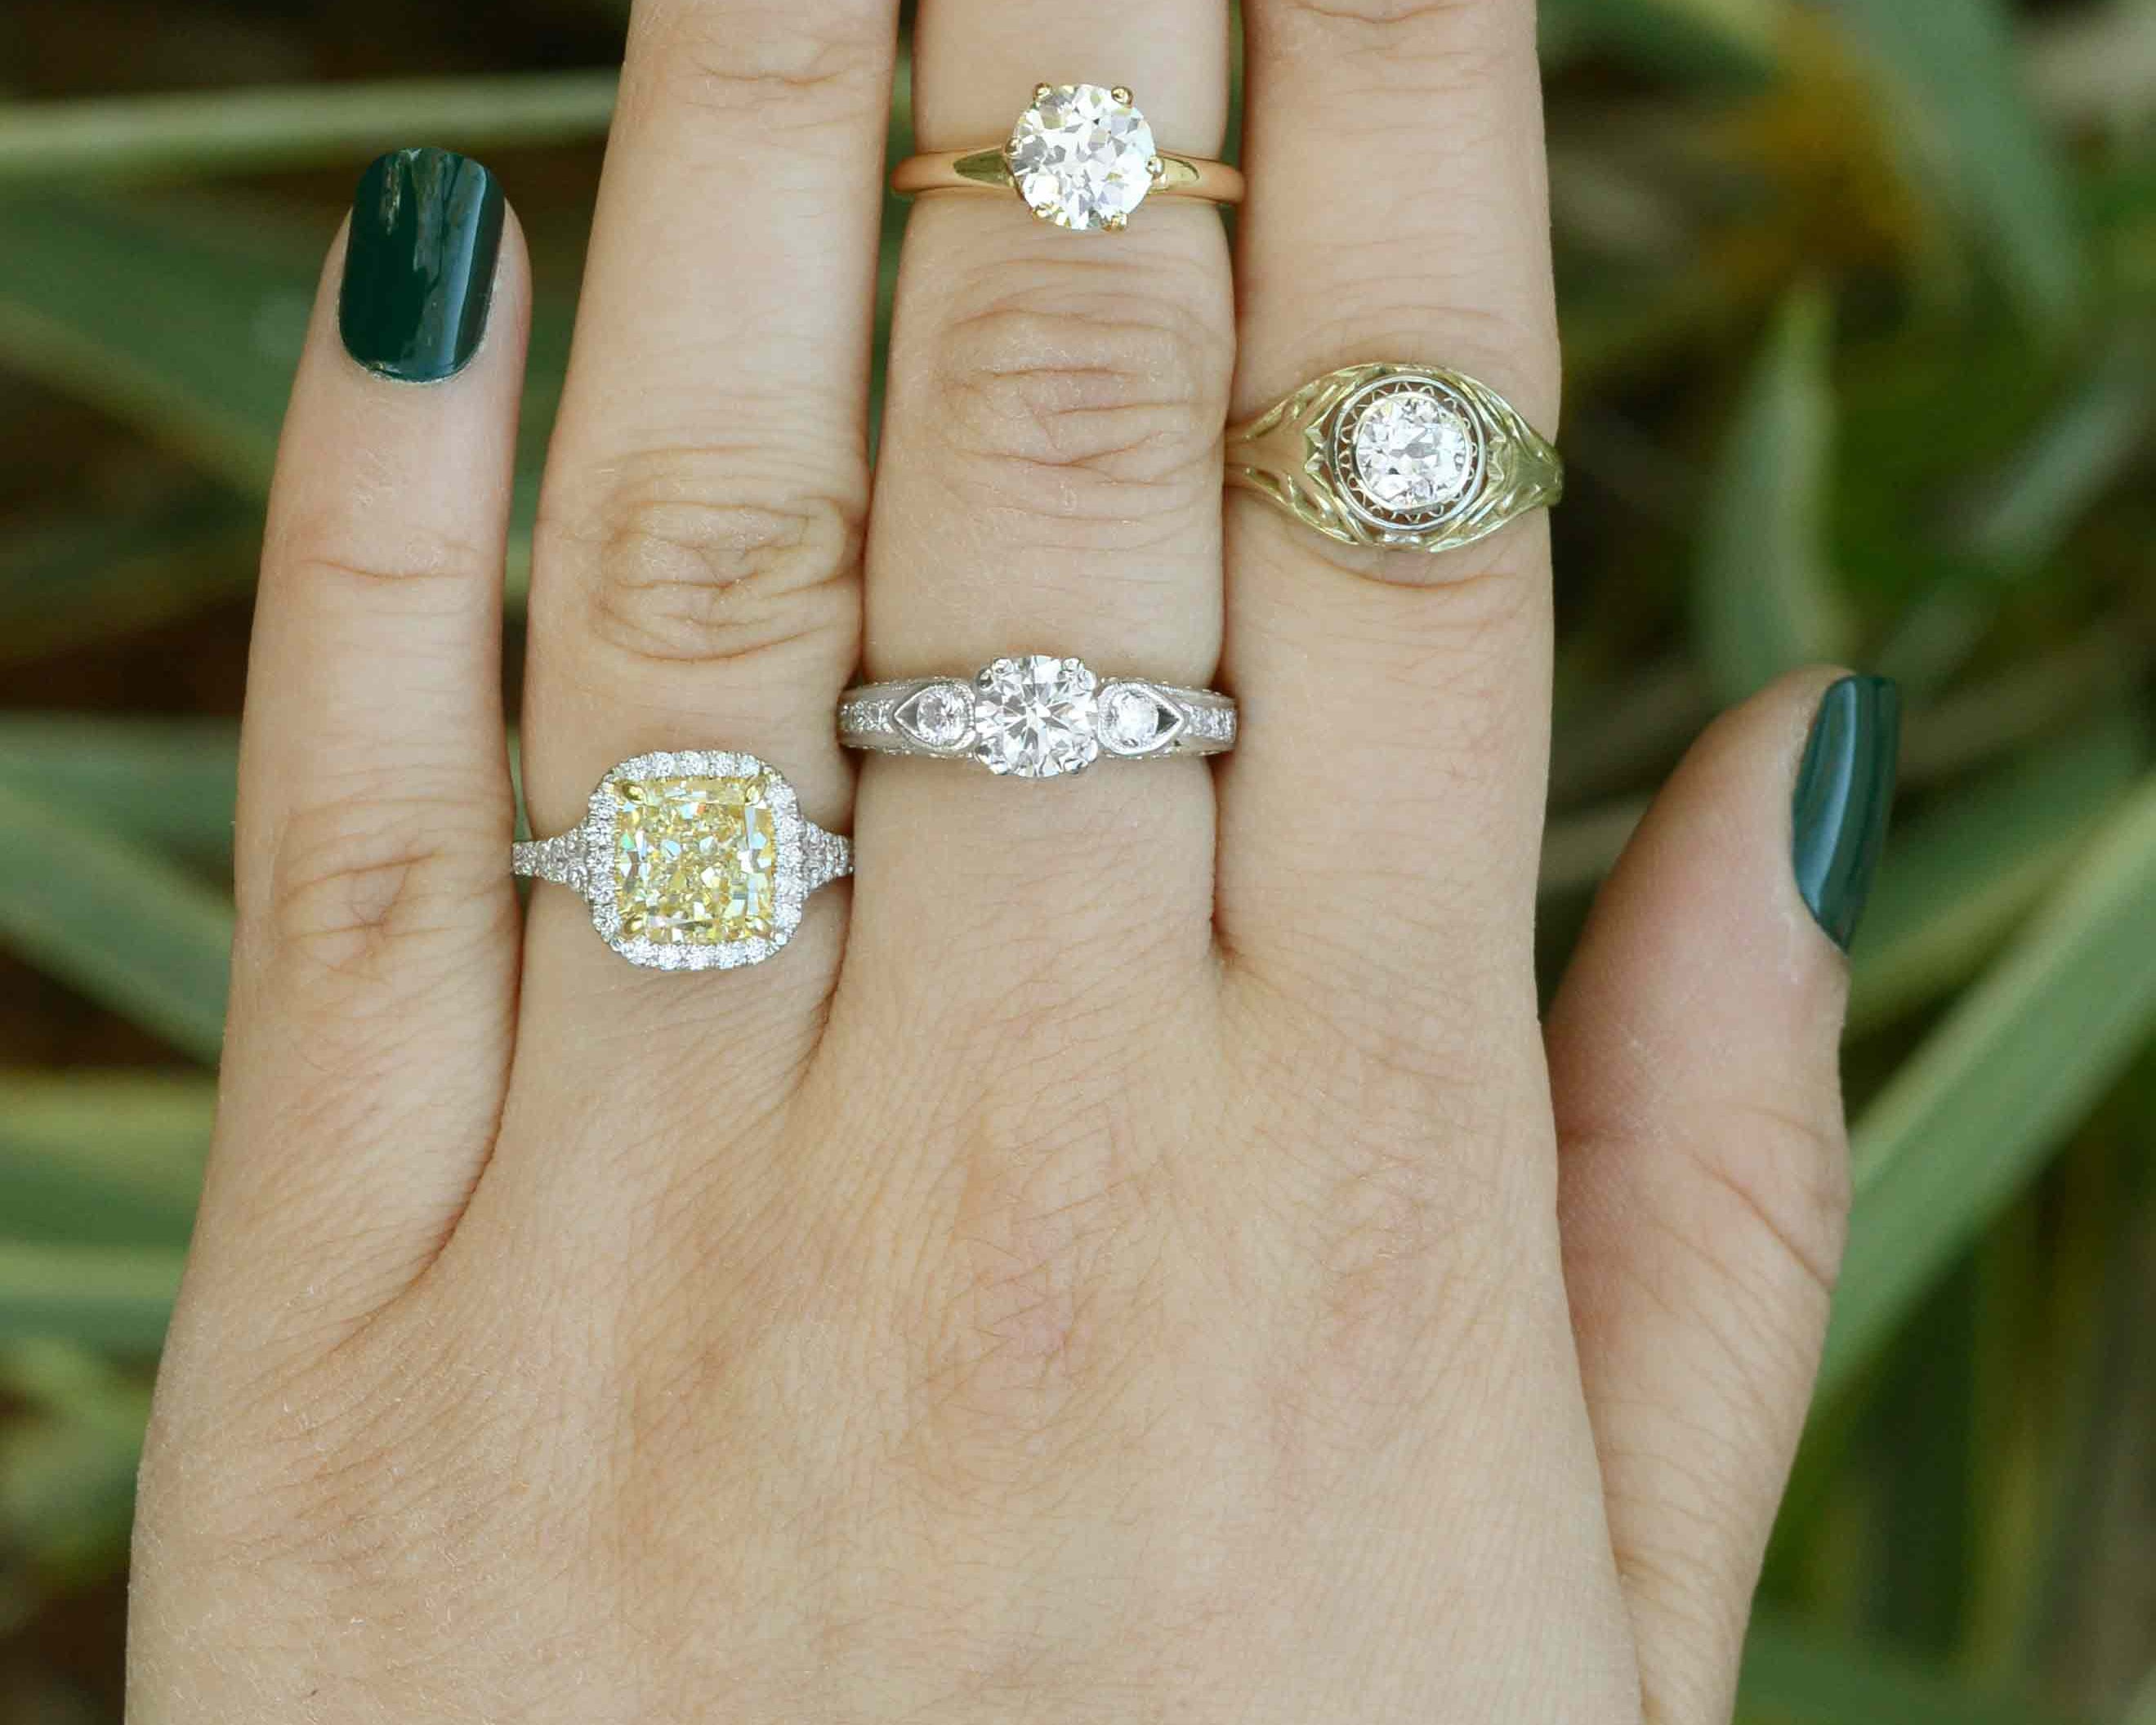 Some of our estate diamond solitaire engagement rings.